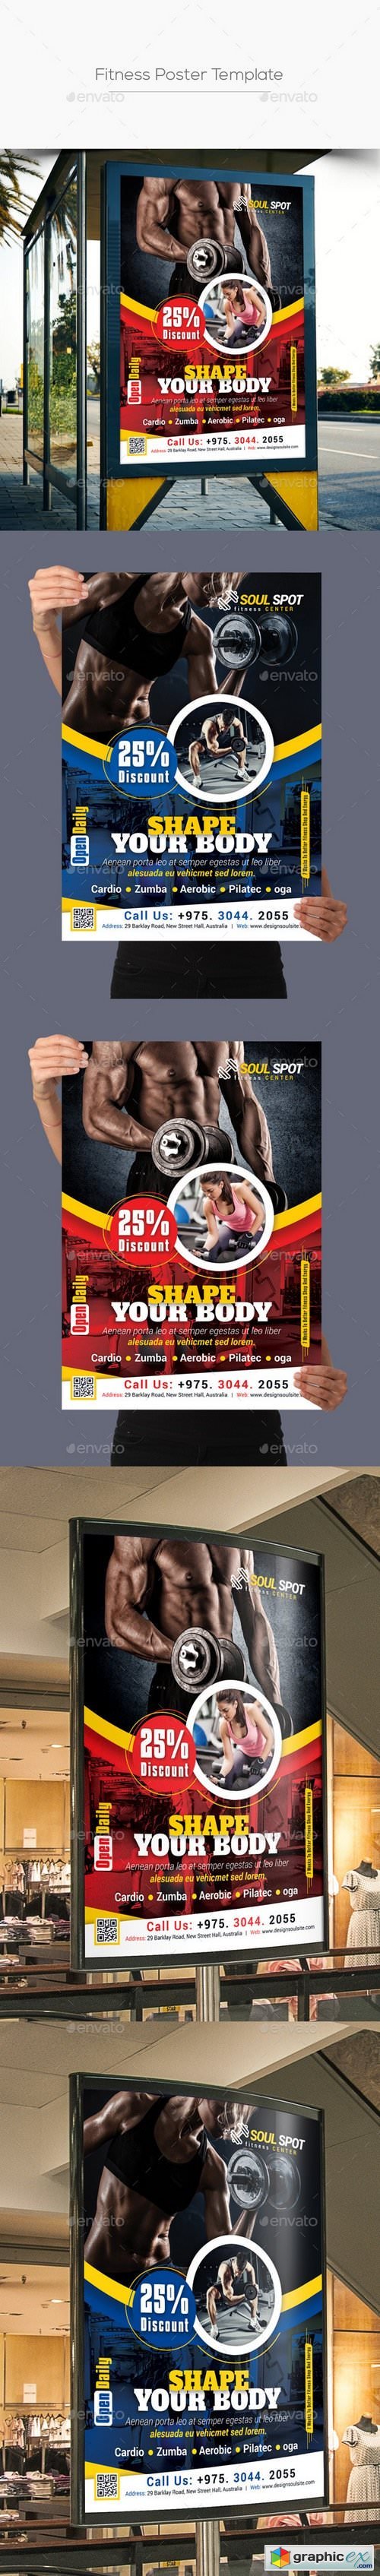 Fitness Poster